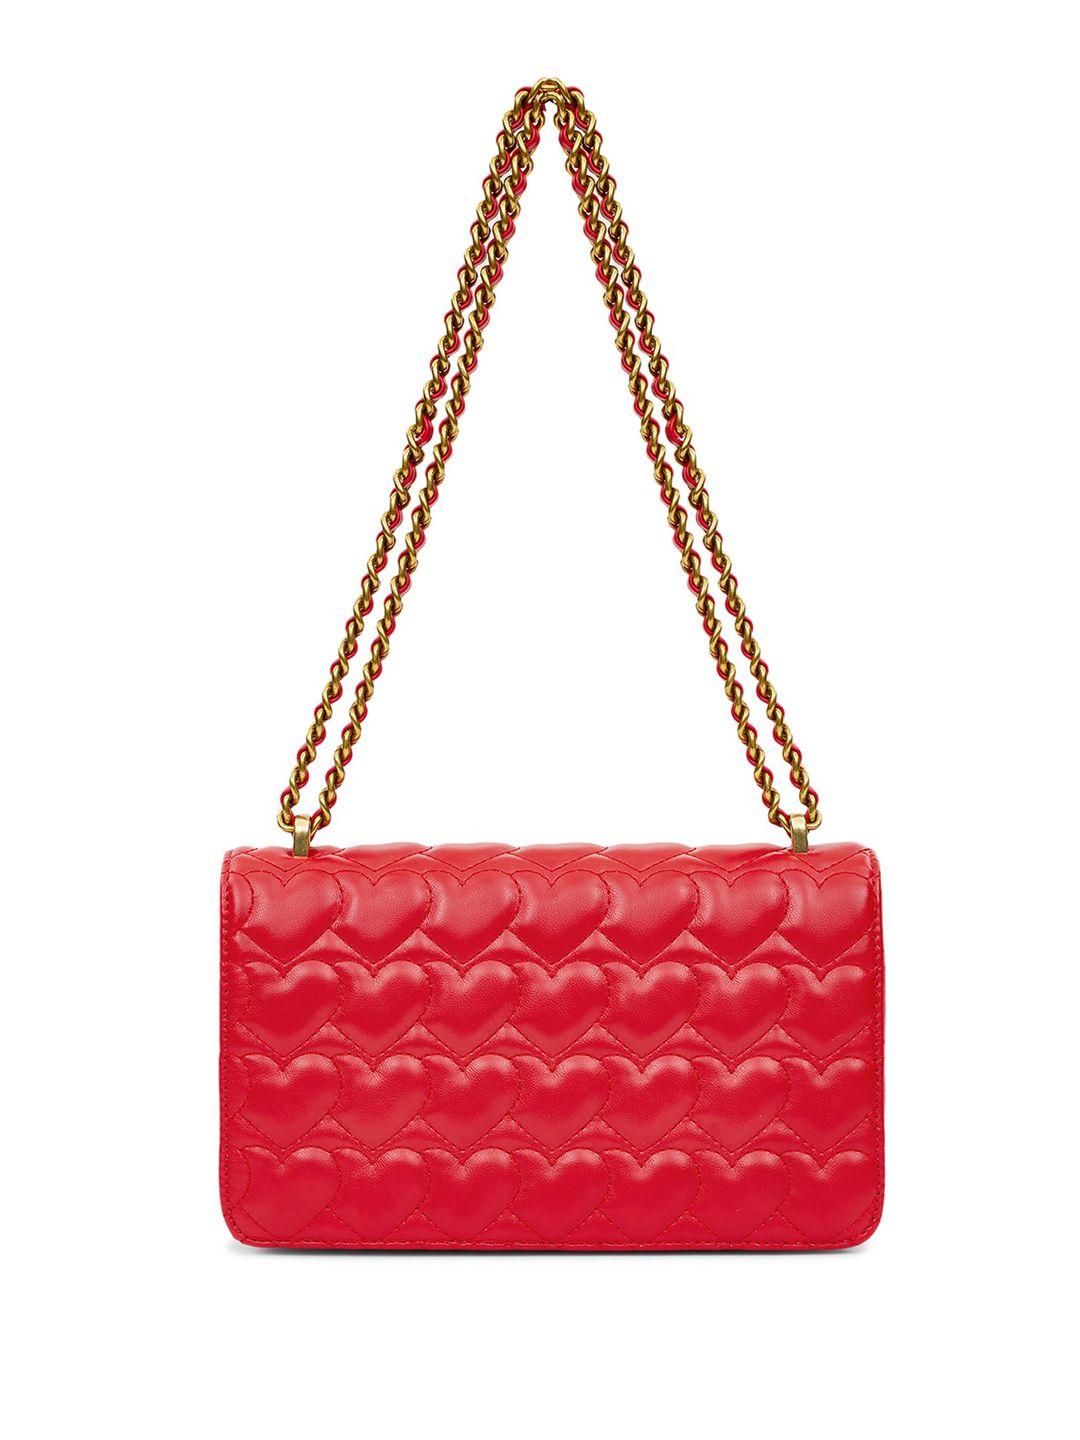 miraggio textured structured shoulder bag with quilted